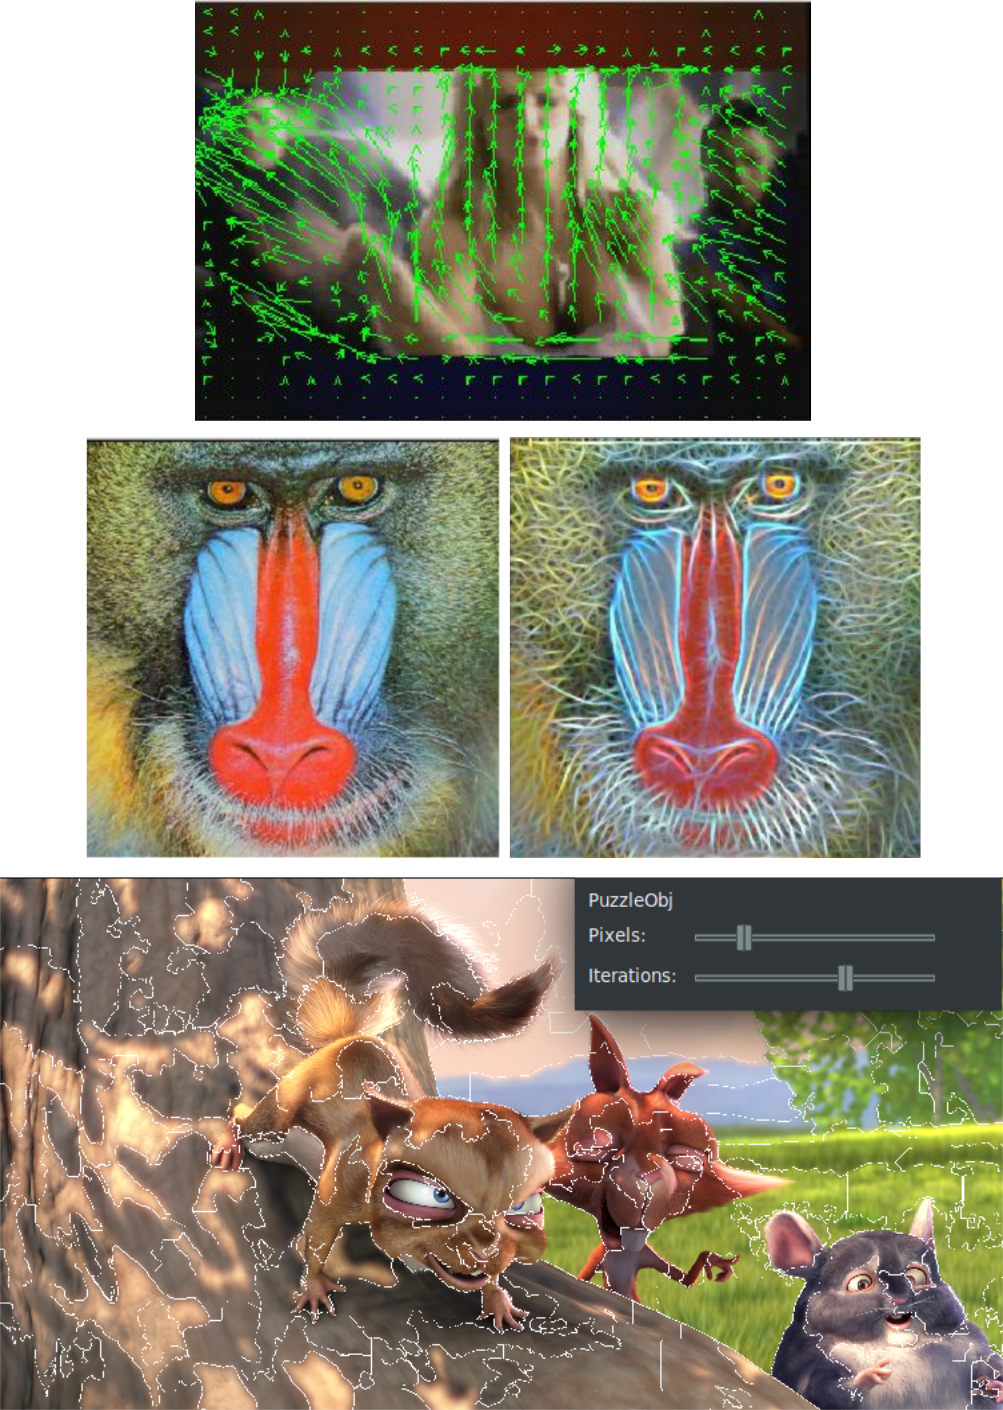 images/opencv.png